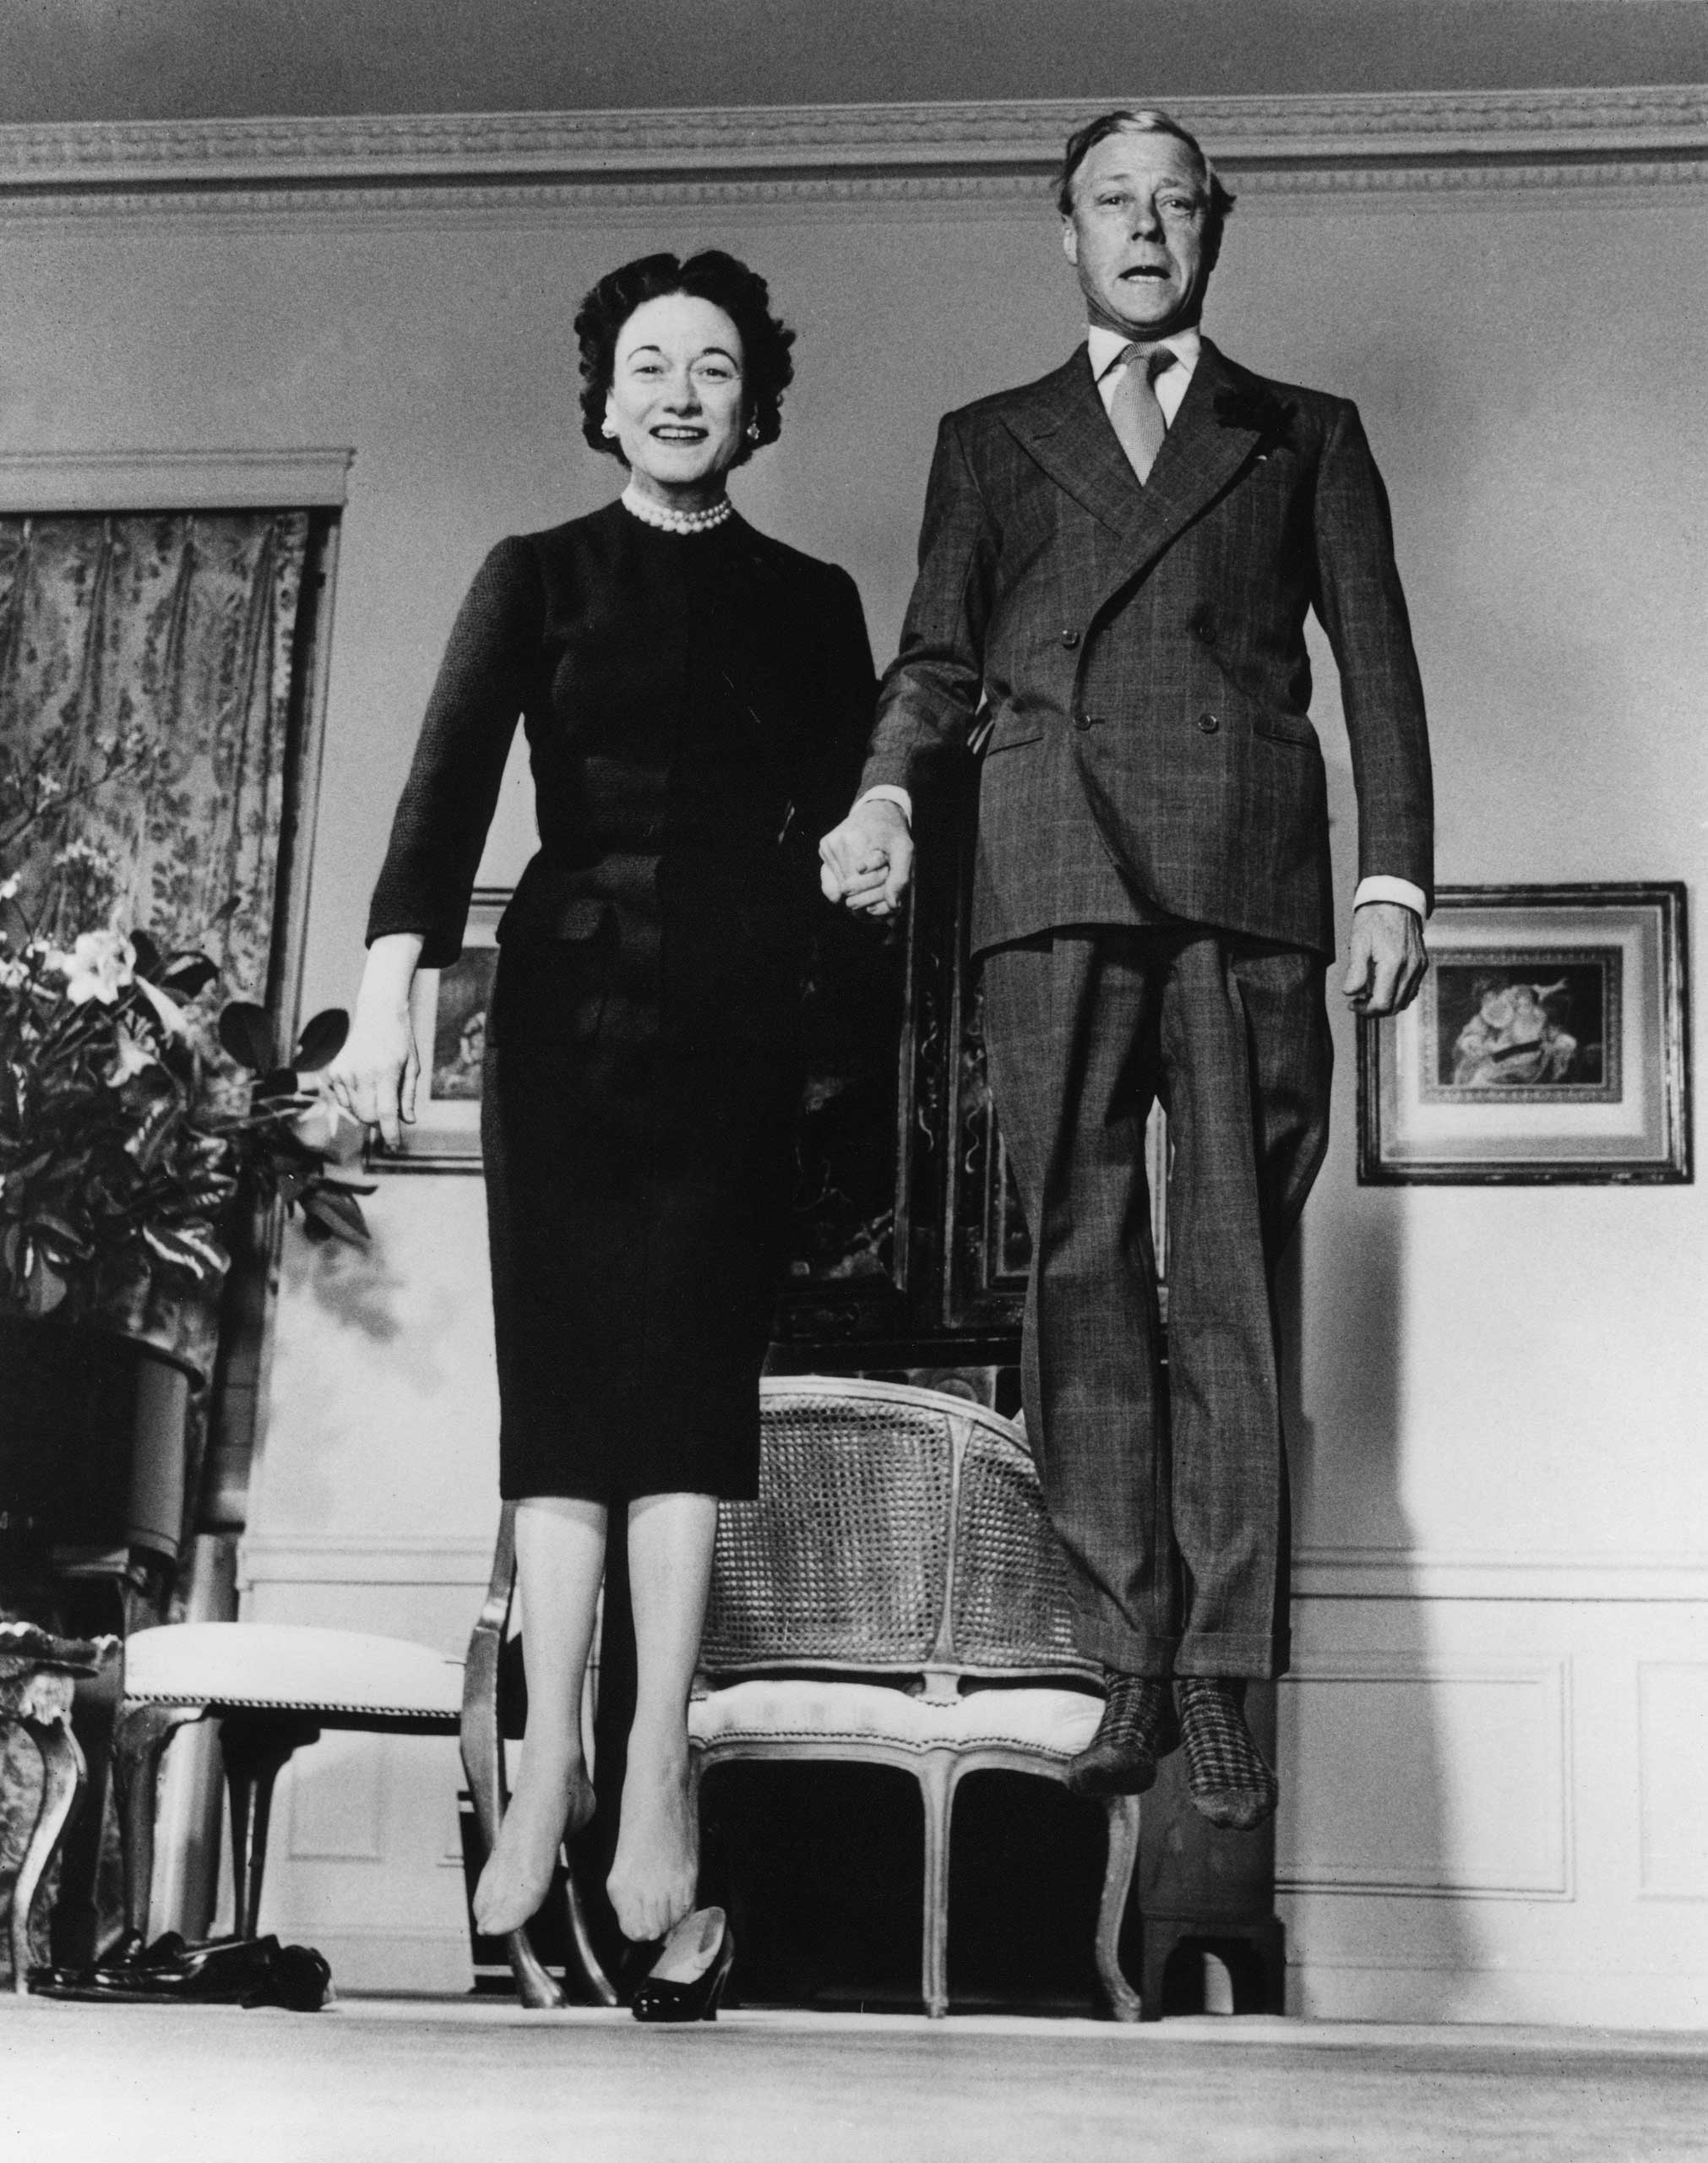 1959 | The Duke and Duchess of Windsor jump for photographer Philippe Halsman. Originally published in the November 9, 1959, issue of LIFE